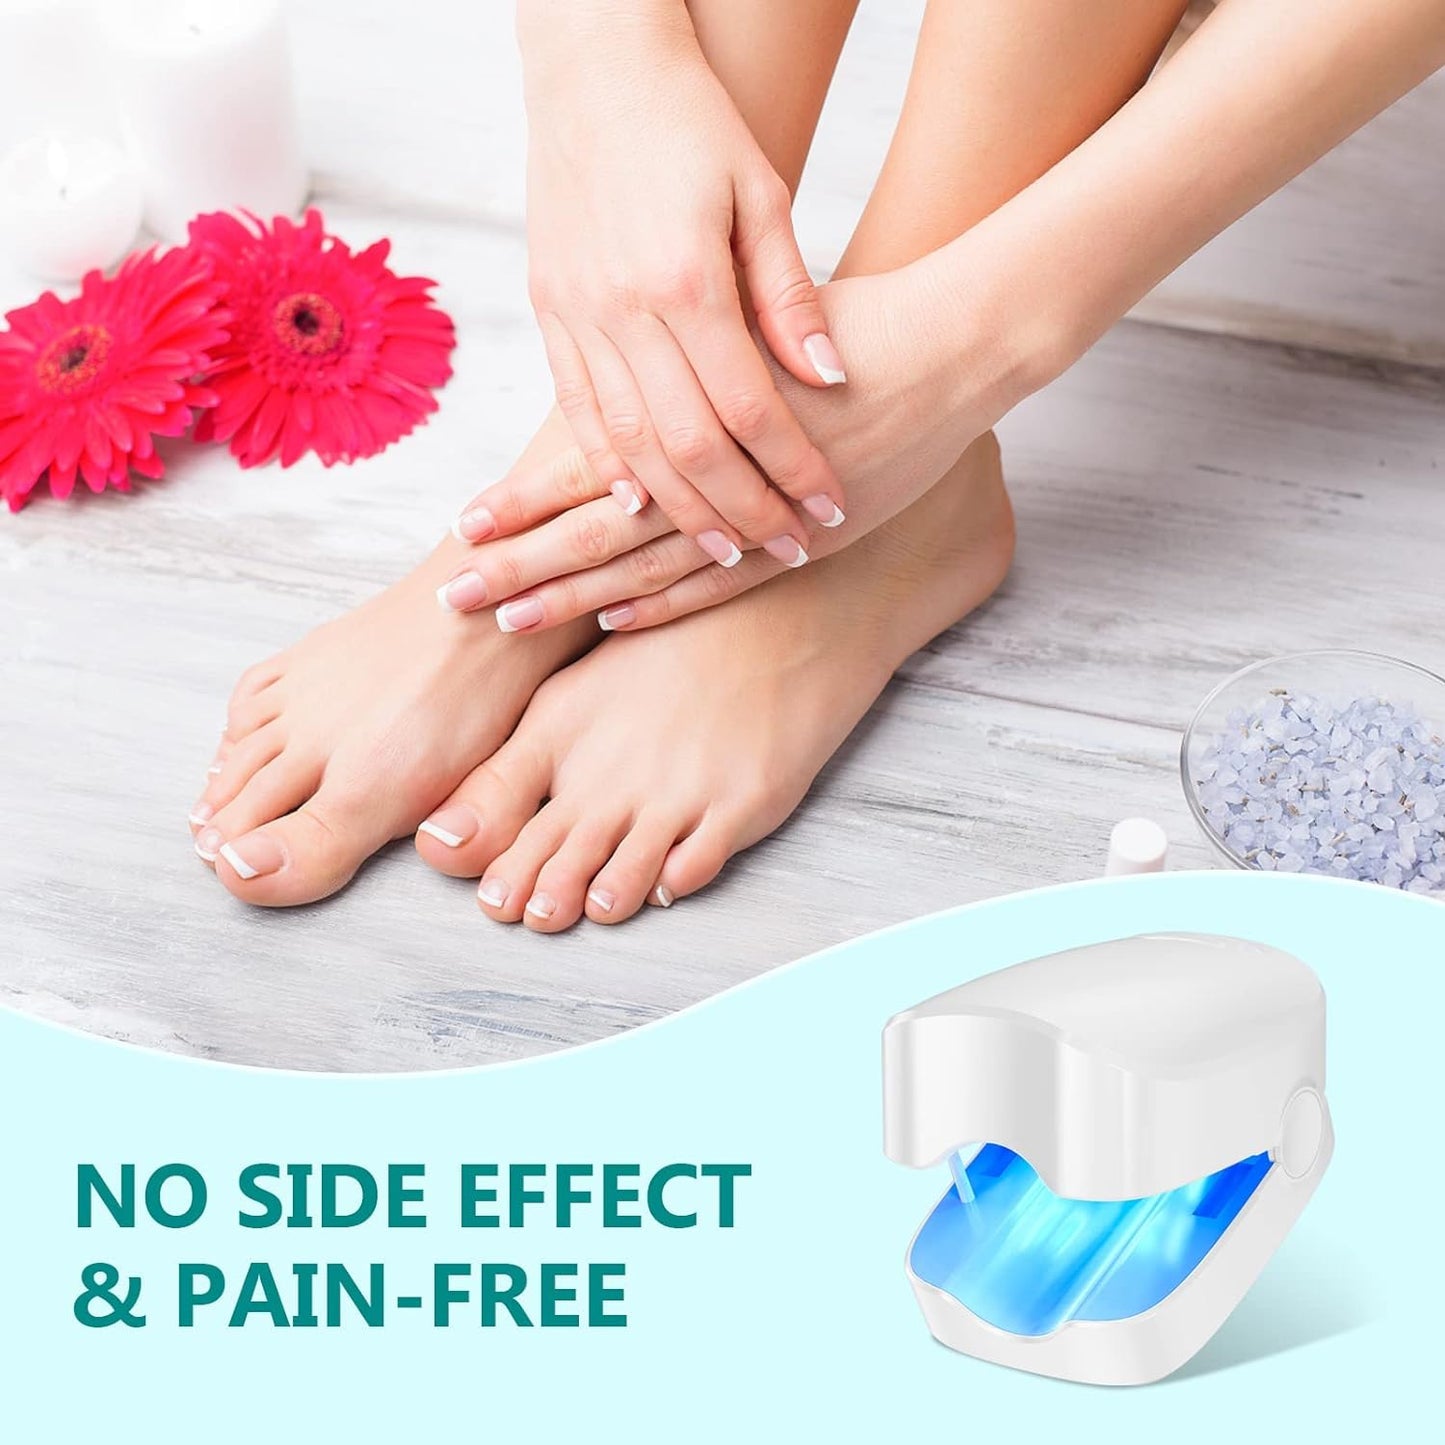 Anyork Toenail Fungus Treatment La ser Device Nail Fungus Treatment for Toe Nail Automatic Nail Fungal Cleaning Device Remover for Damaged Nails, 470nm Blue Light + 905nm Infrared Light Theapy